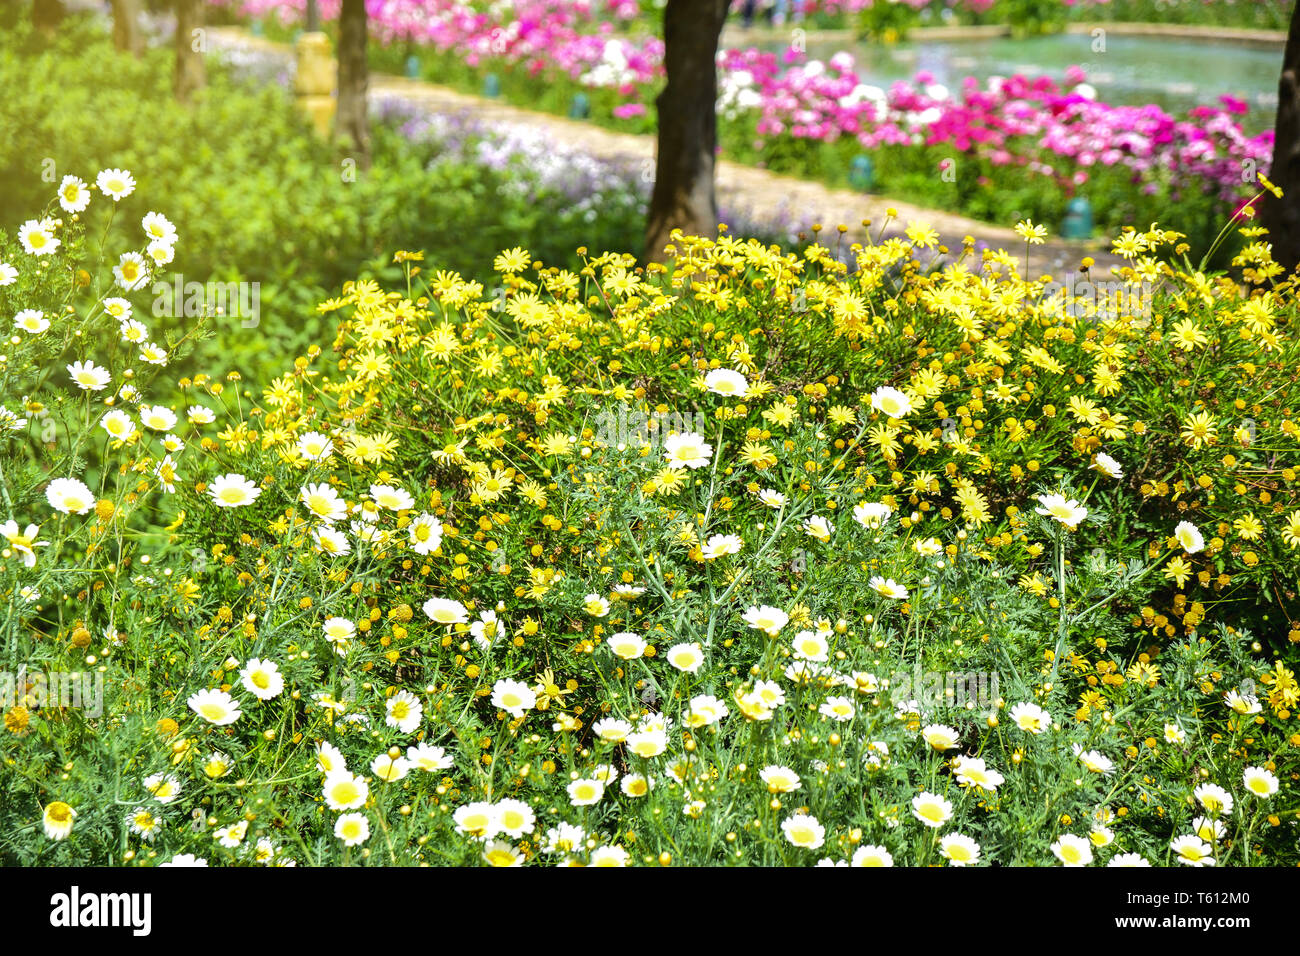 Garden with walk, trees and several flowers. Sunlight oxeye and carnation flowers cultivated. Stock Photo